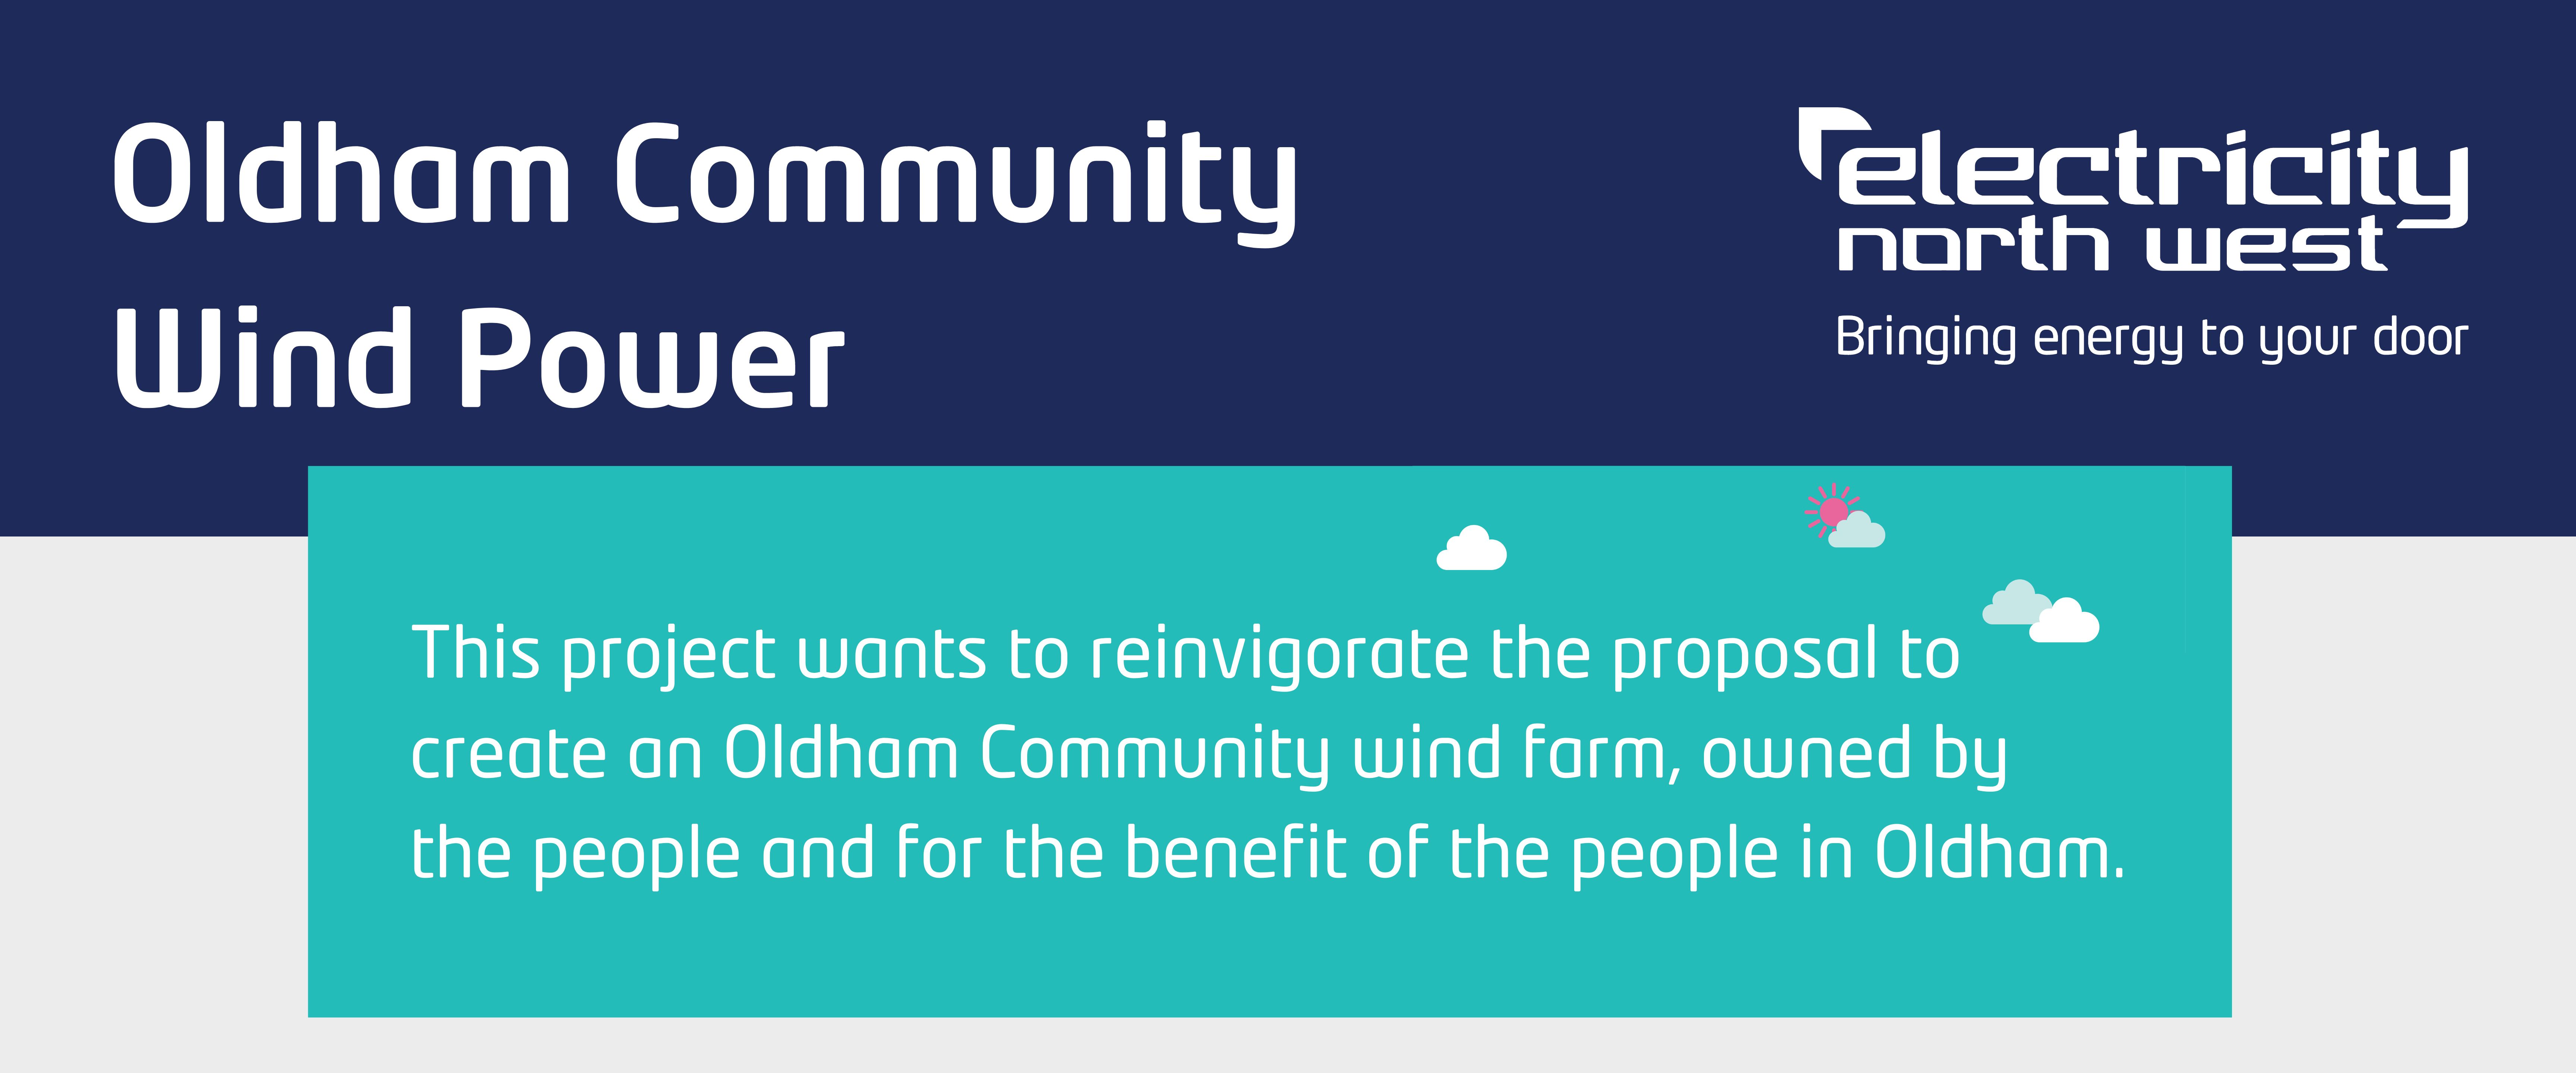 Oldham Community Wind Power, this project wants to reinvigorate the proposal to create an Oldham Community wind farm, owned by the people and for the benefit of the people in Oldham.